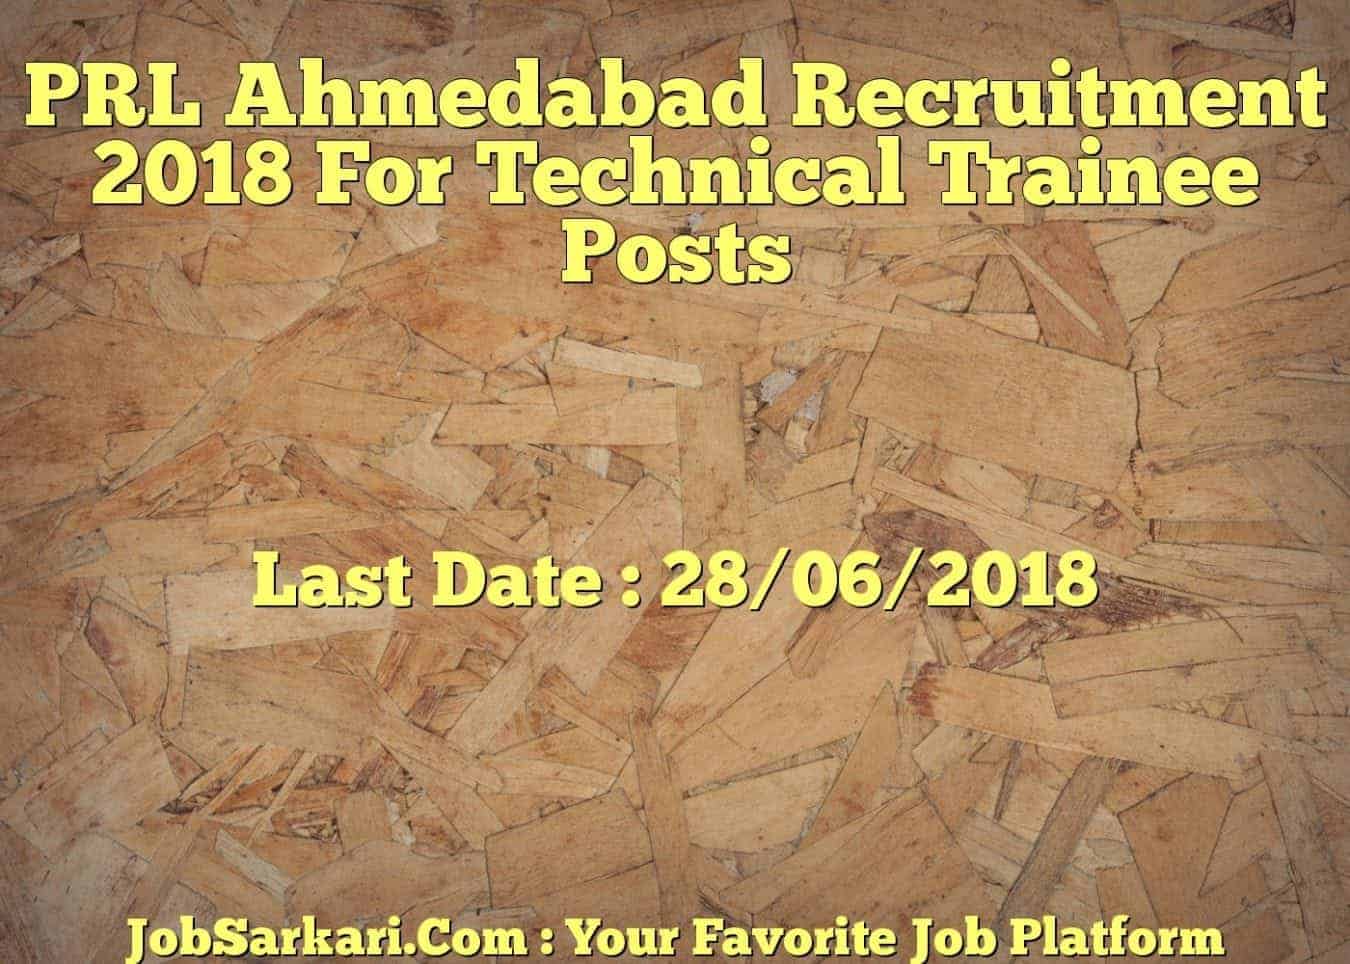 PRL Ahmedabad Recruitment 2018 For Technical Trainee Posts